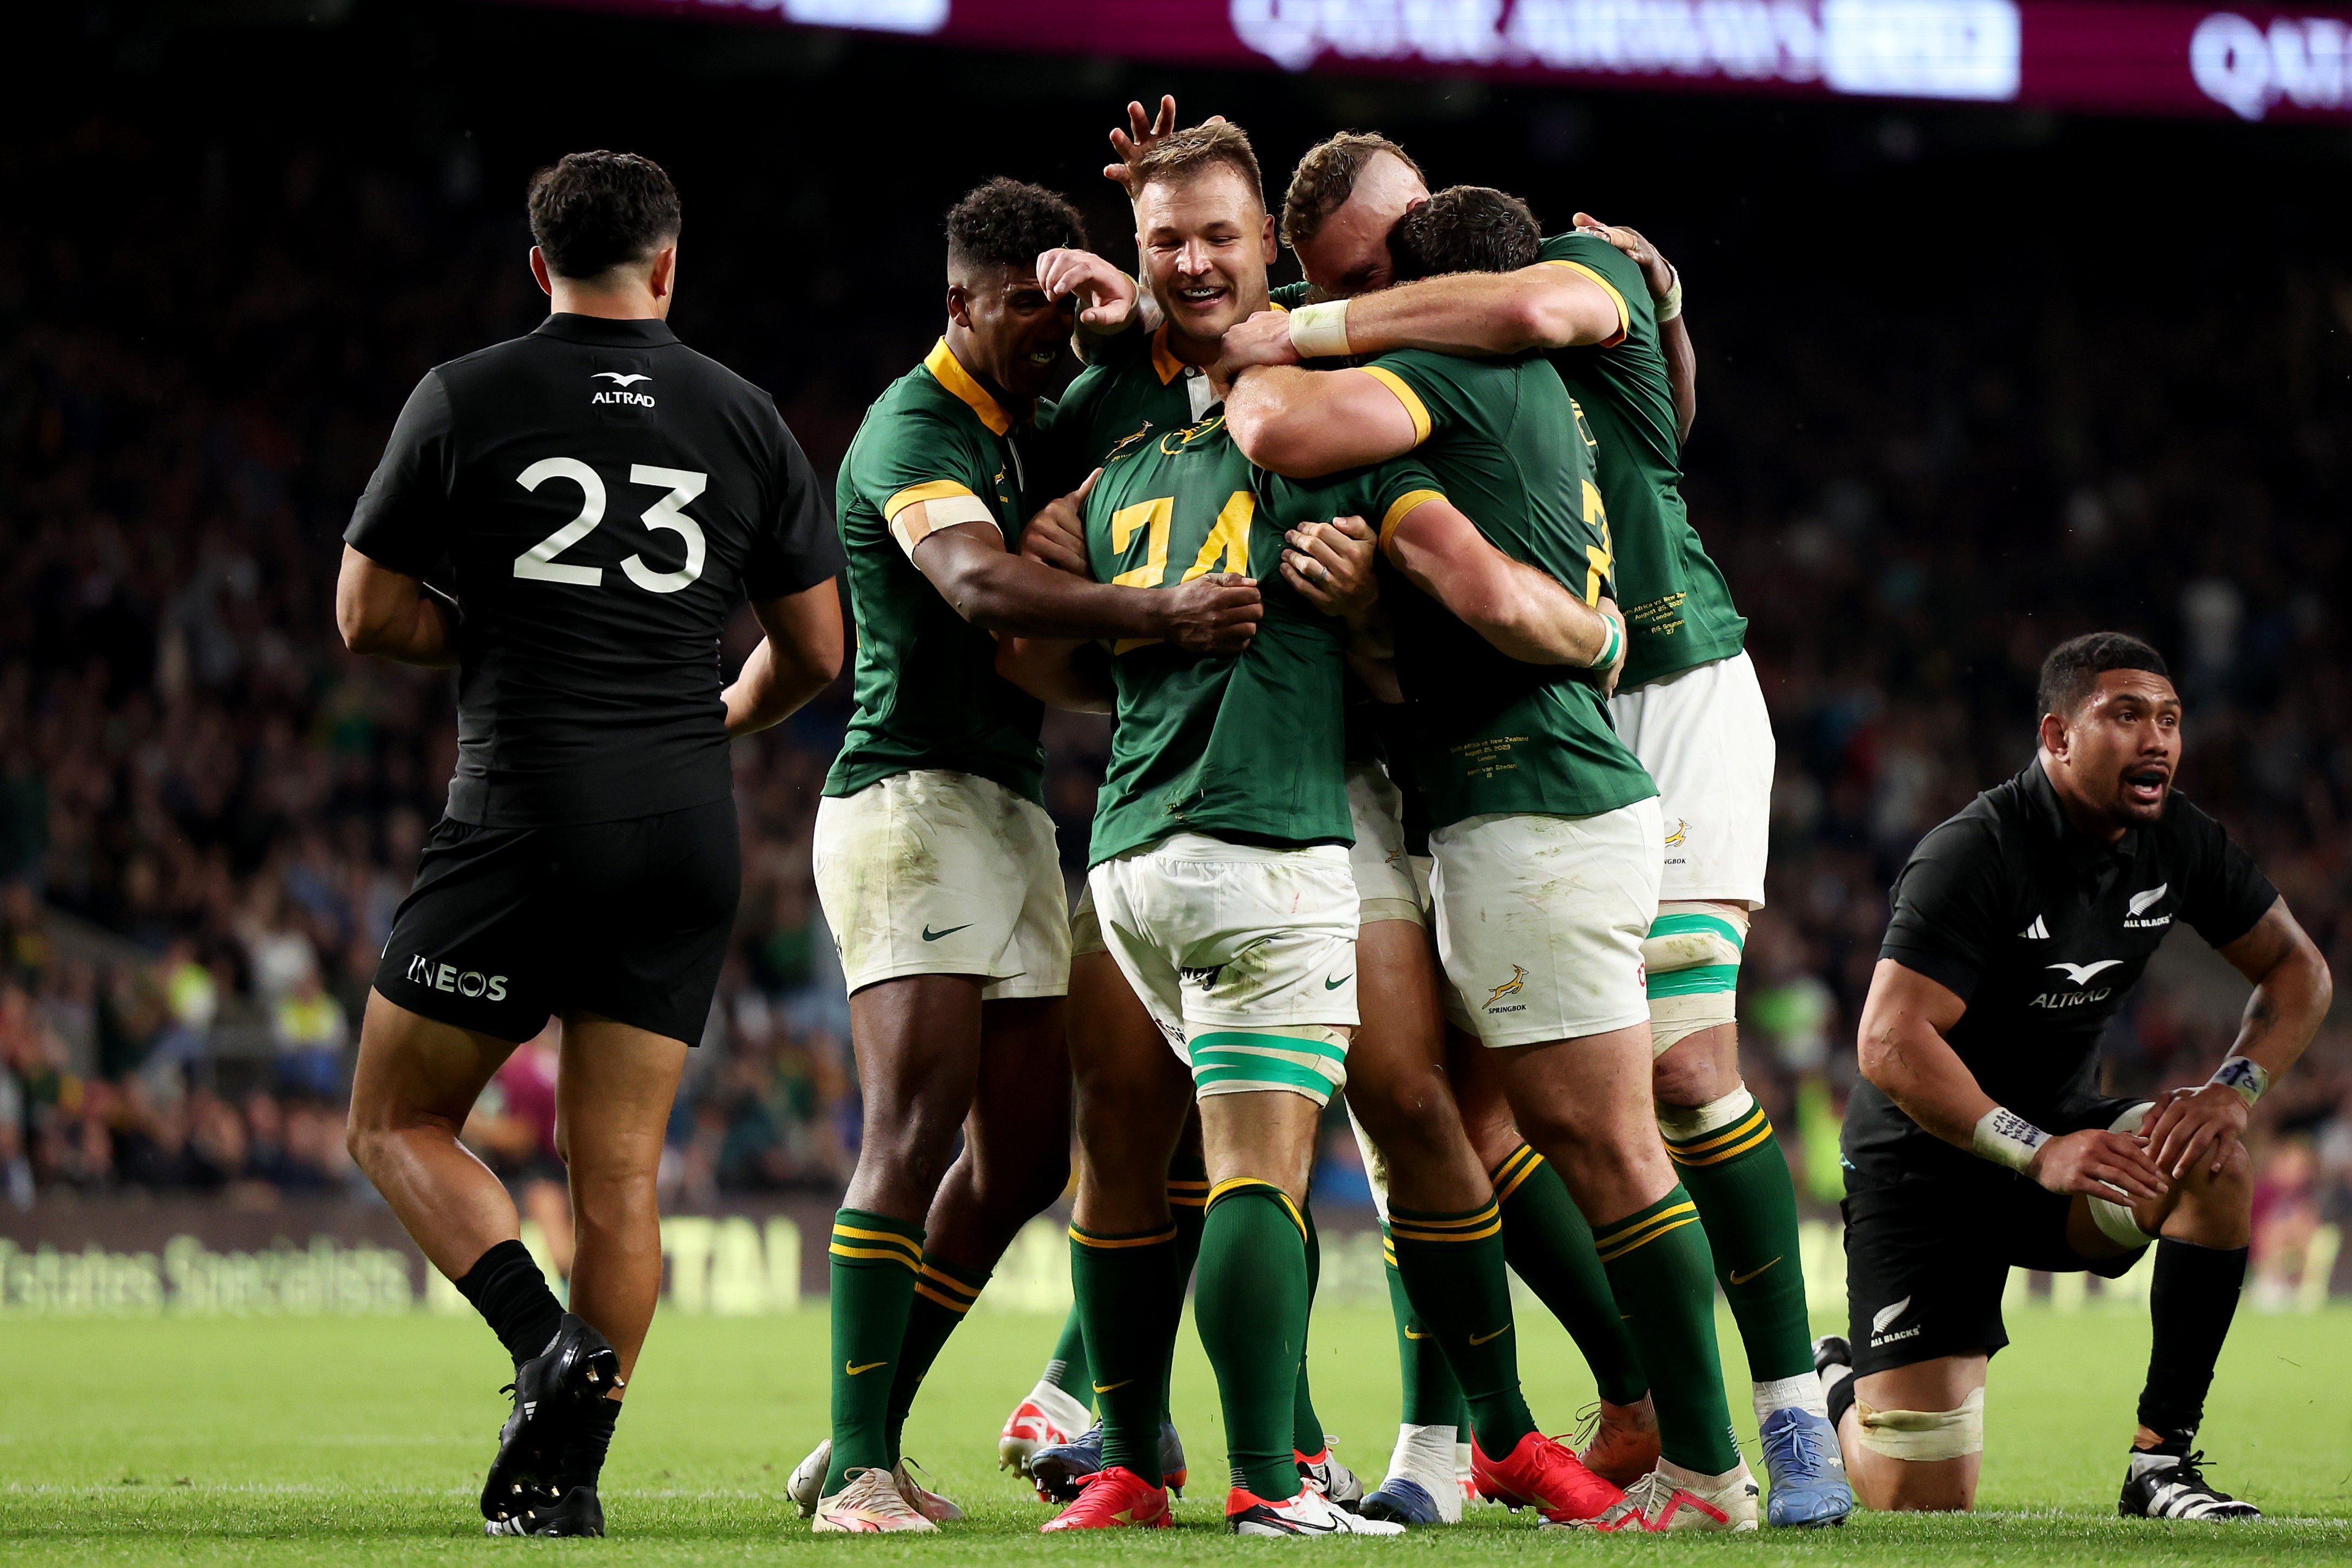 South Africa thrashed New Zealand in their final